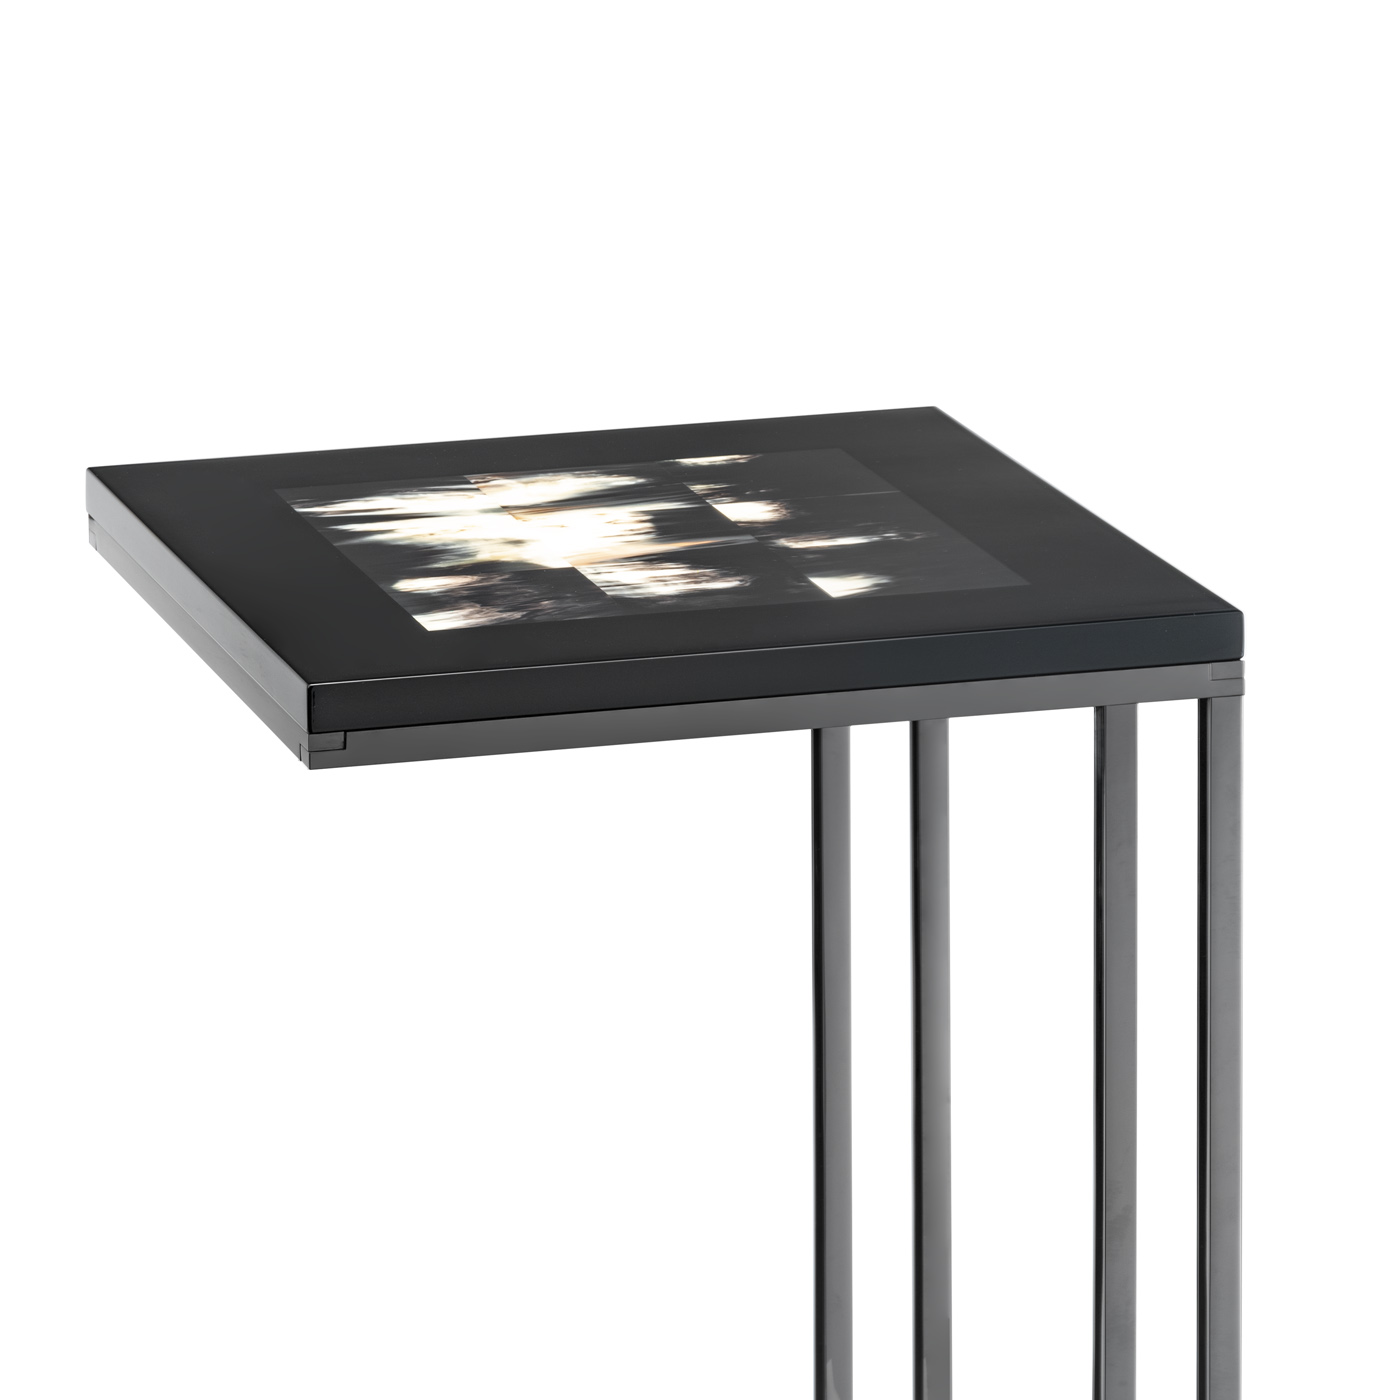 Tables and console tables - Eric end table in horn, glossy black lacquered wood and gunmetal stainless steel - detail -Arcahorn